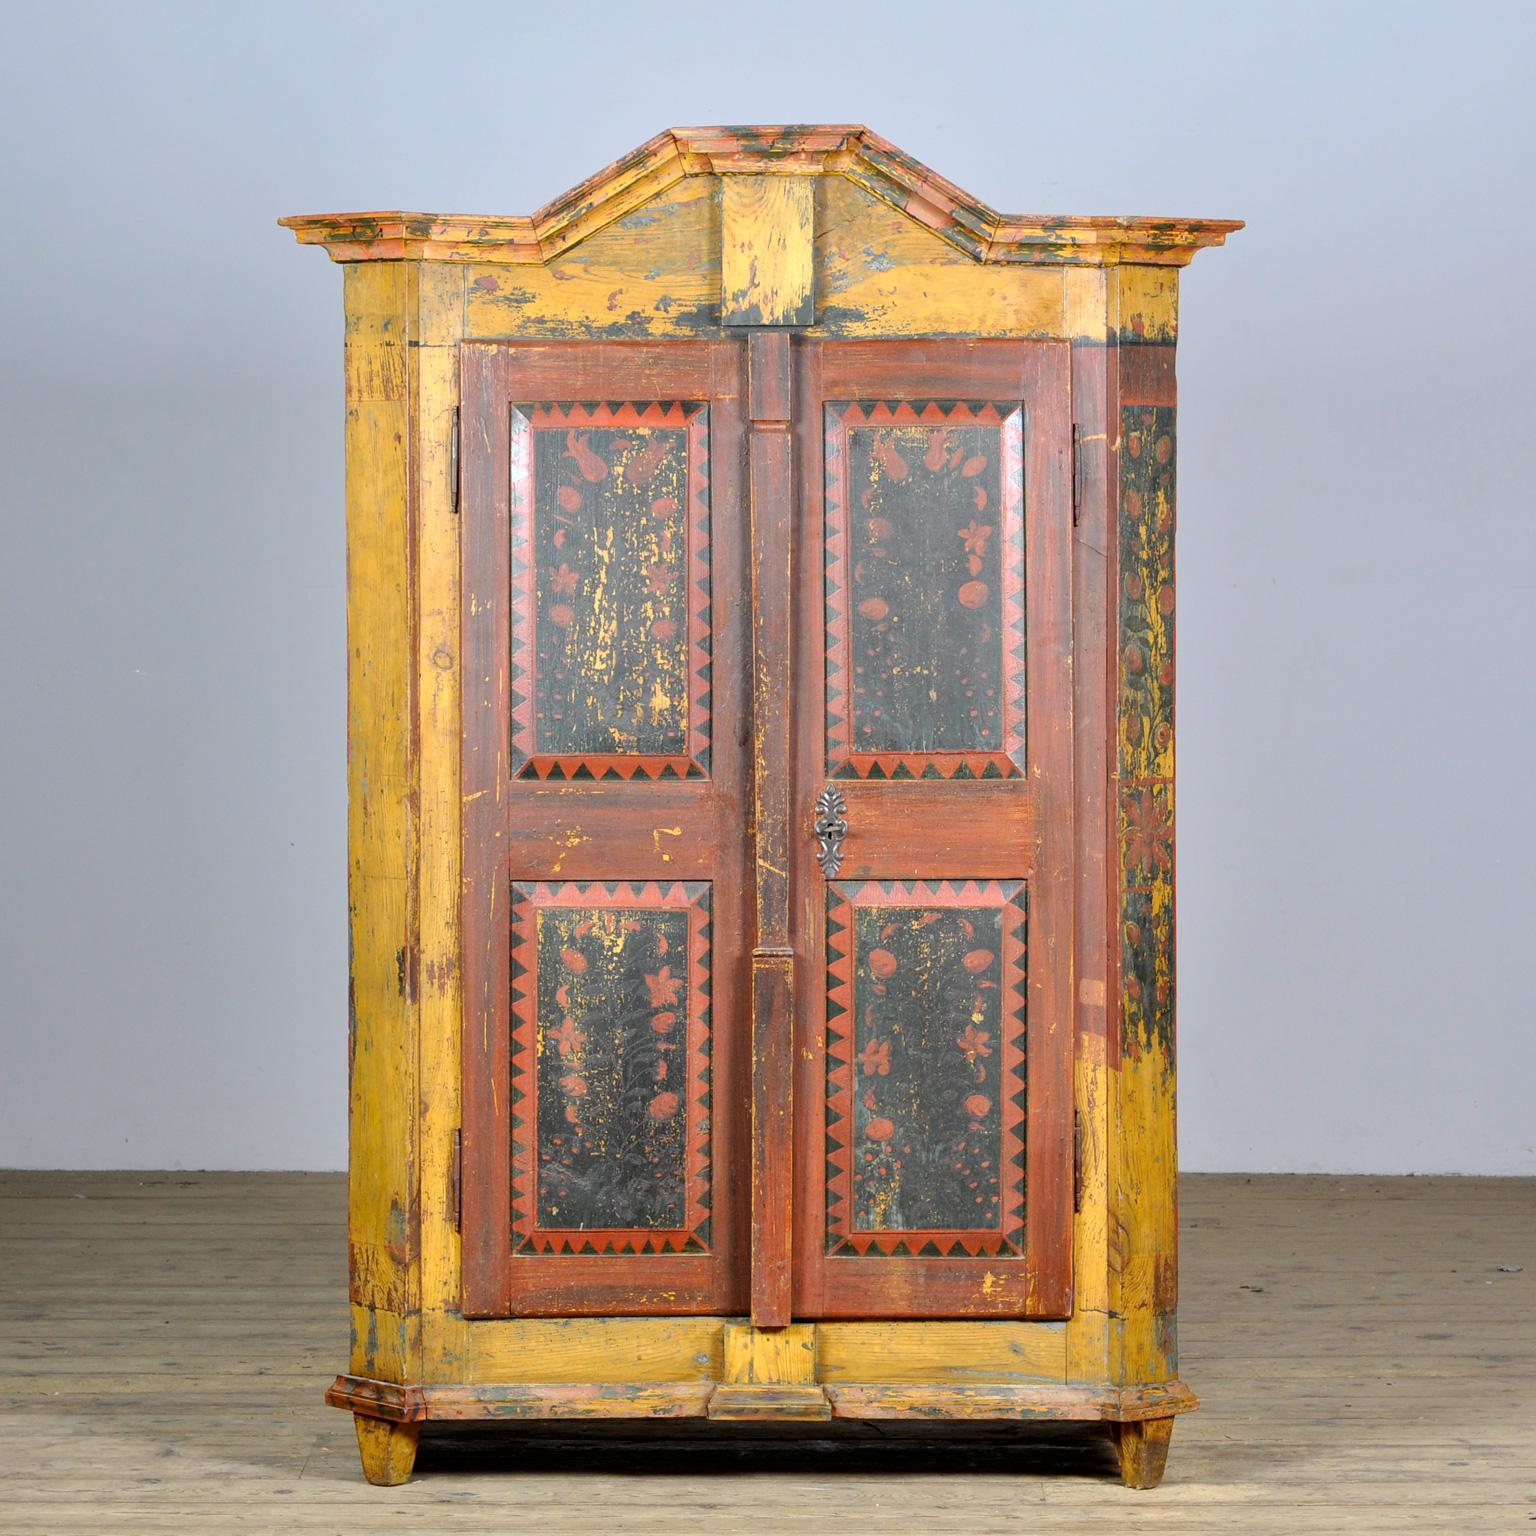 A beautiful cabinet from the rural south of Germany, dating from circa 1850. The cabinet was probably given as a wedding present. This cabinet is made of solid pine and is hand painted in vibrant colors. The paint has become distressed over the